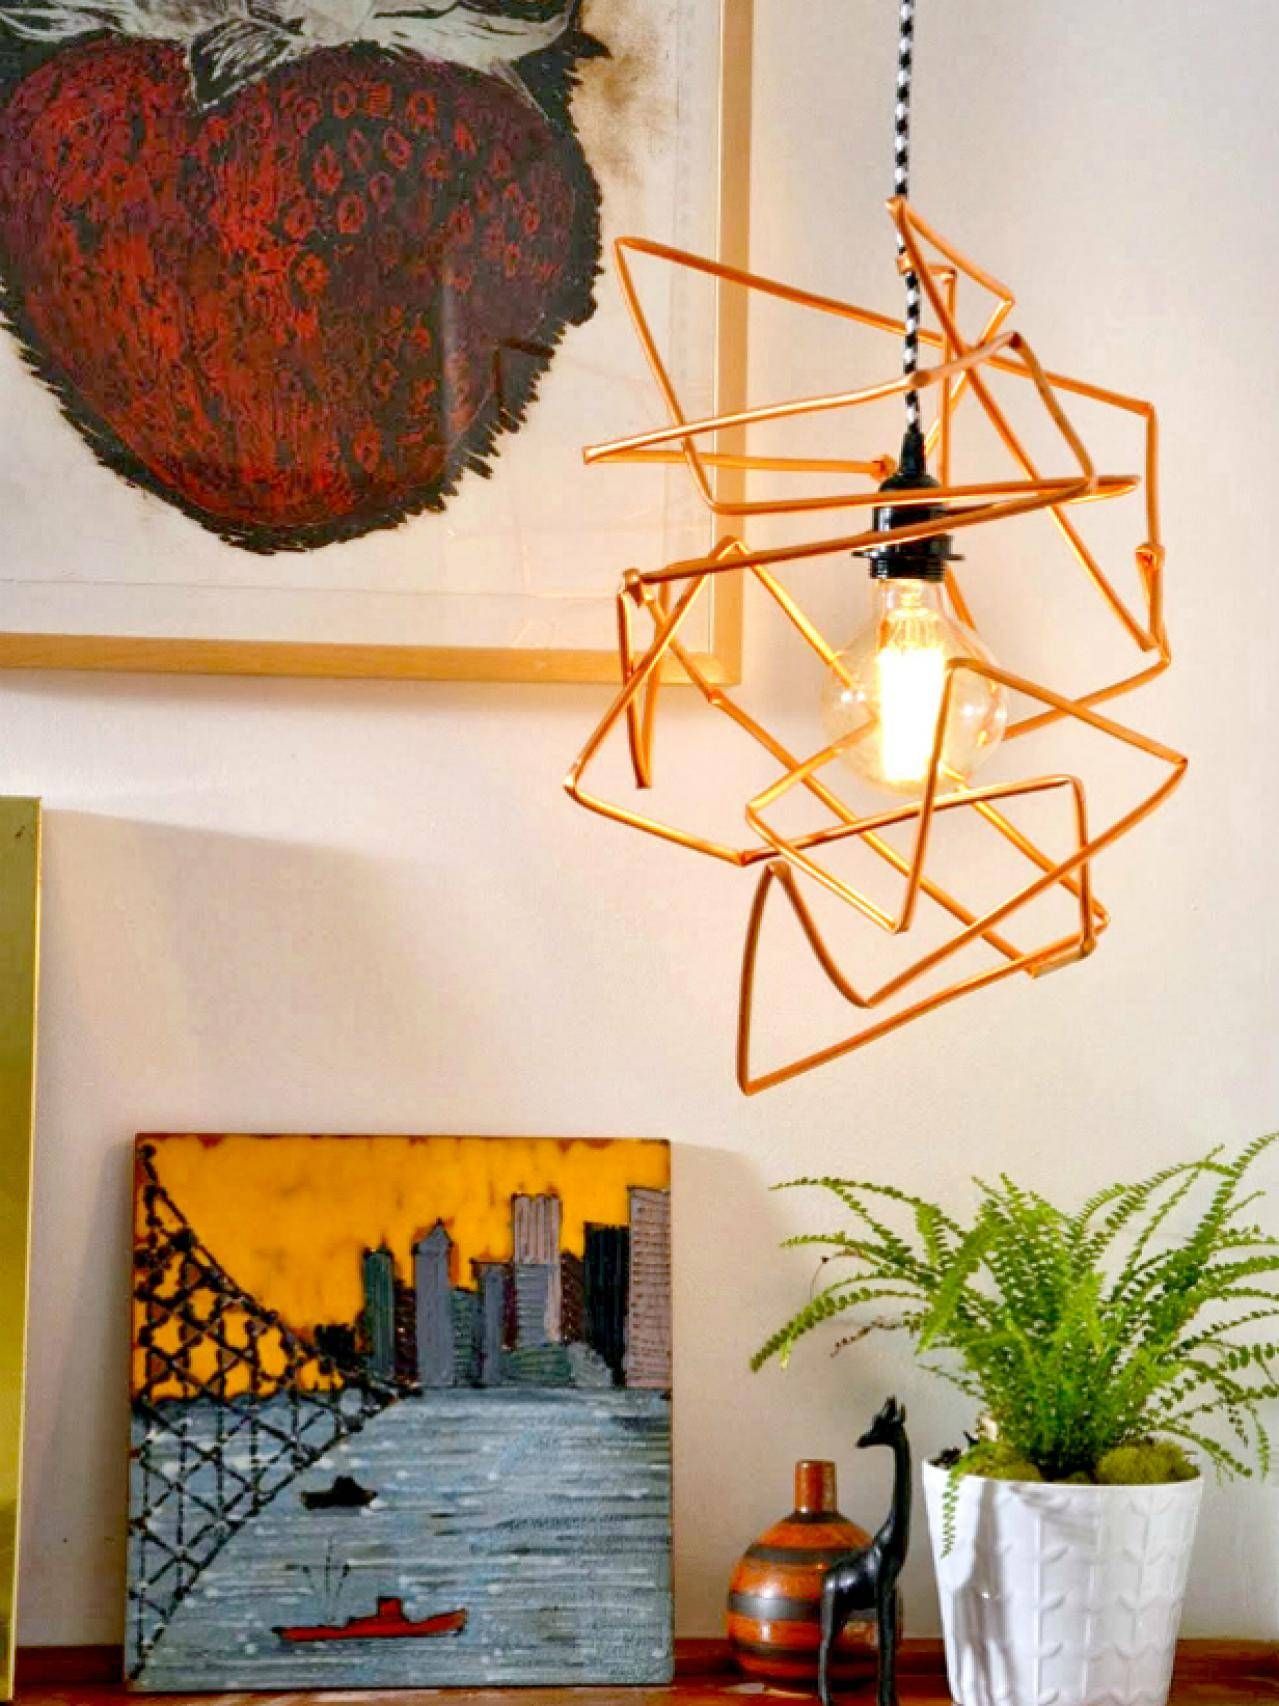 Brighten Up With These Diy Home Lighting Ideas | Hgtv's Decorating With Build Your Own Pendant Lights (View 12 of 15)